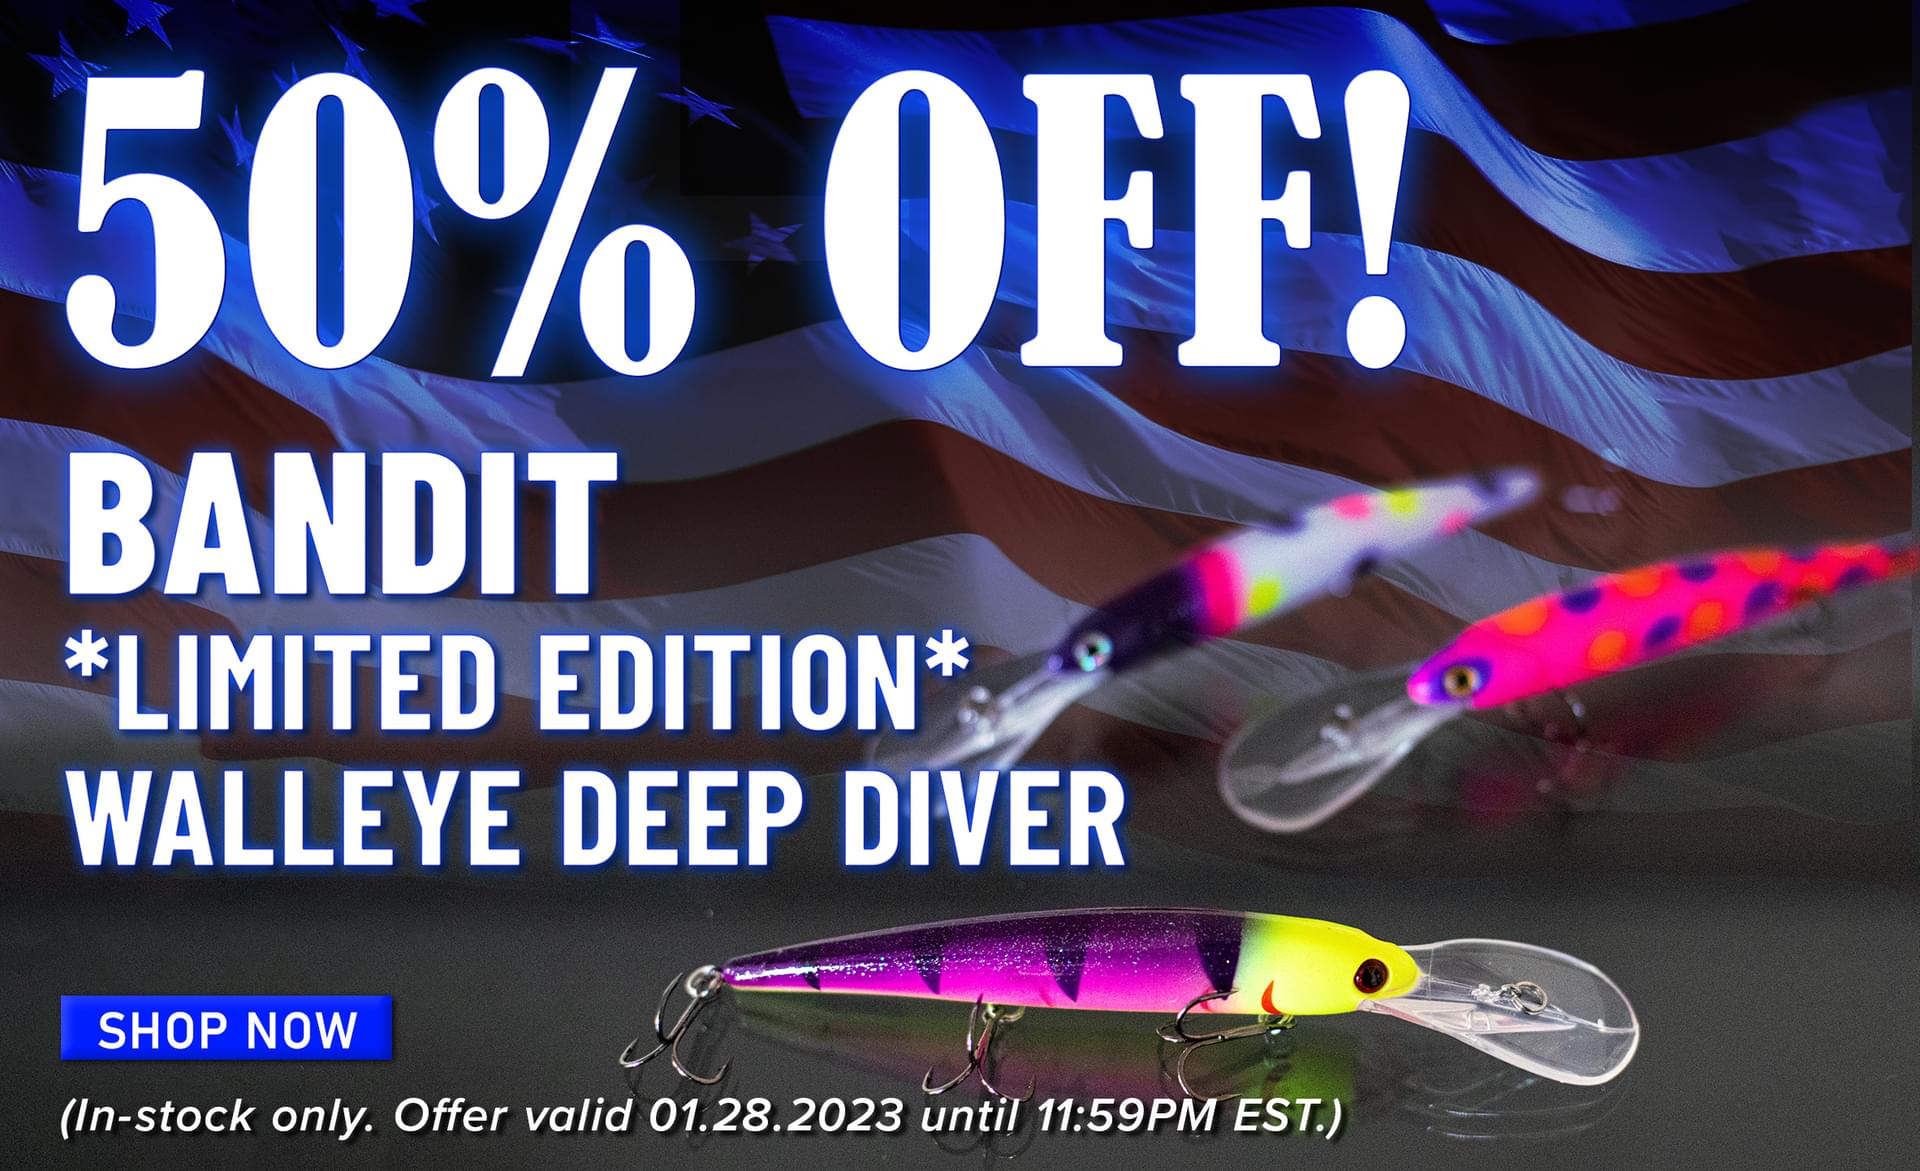 50% Off! Bandit *Limited Edition* Walleye Deep DIver (In-stock only. Offer valid 01.28.2023 until 11:59PM EST.)